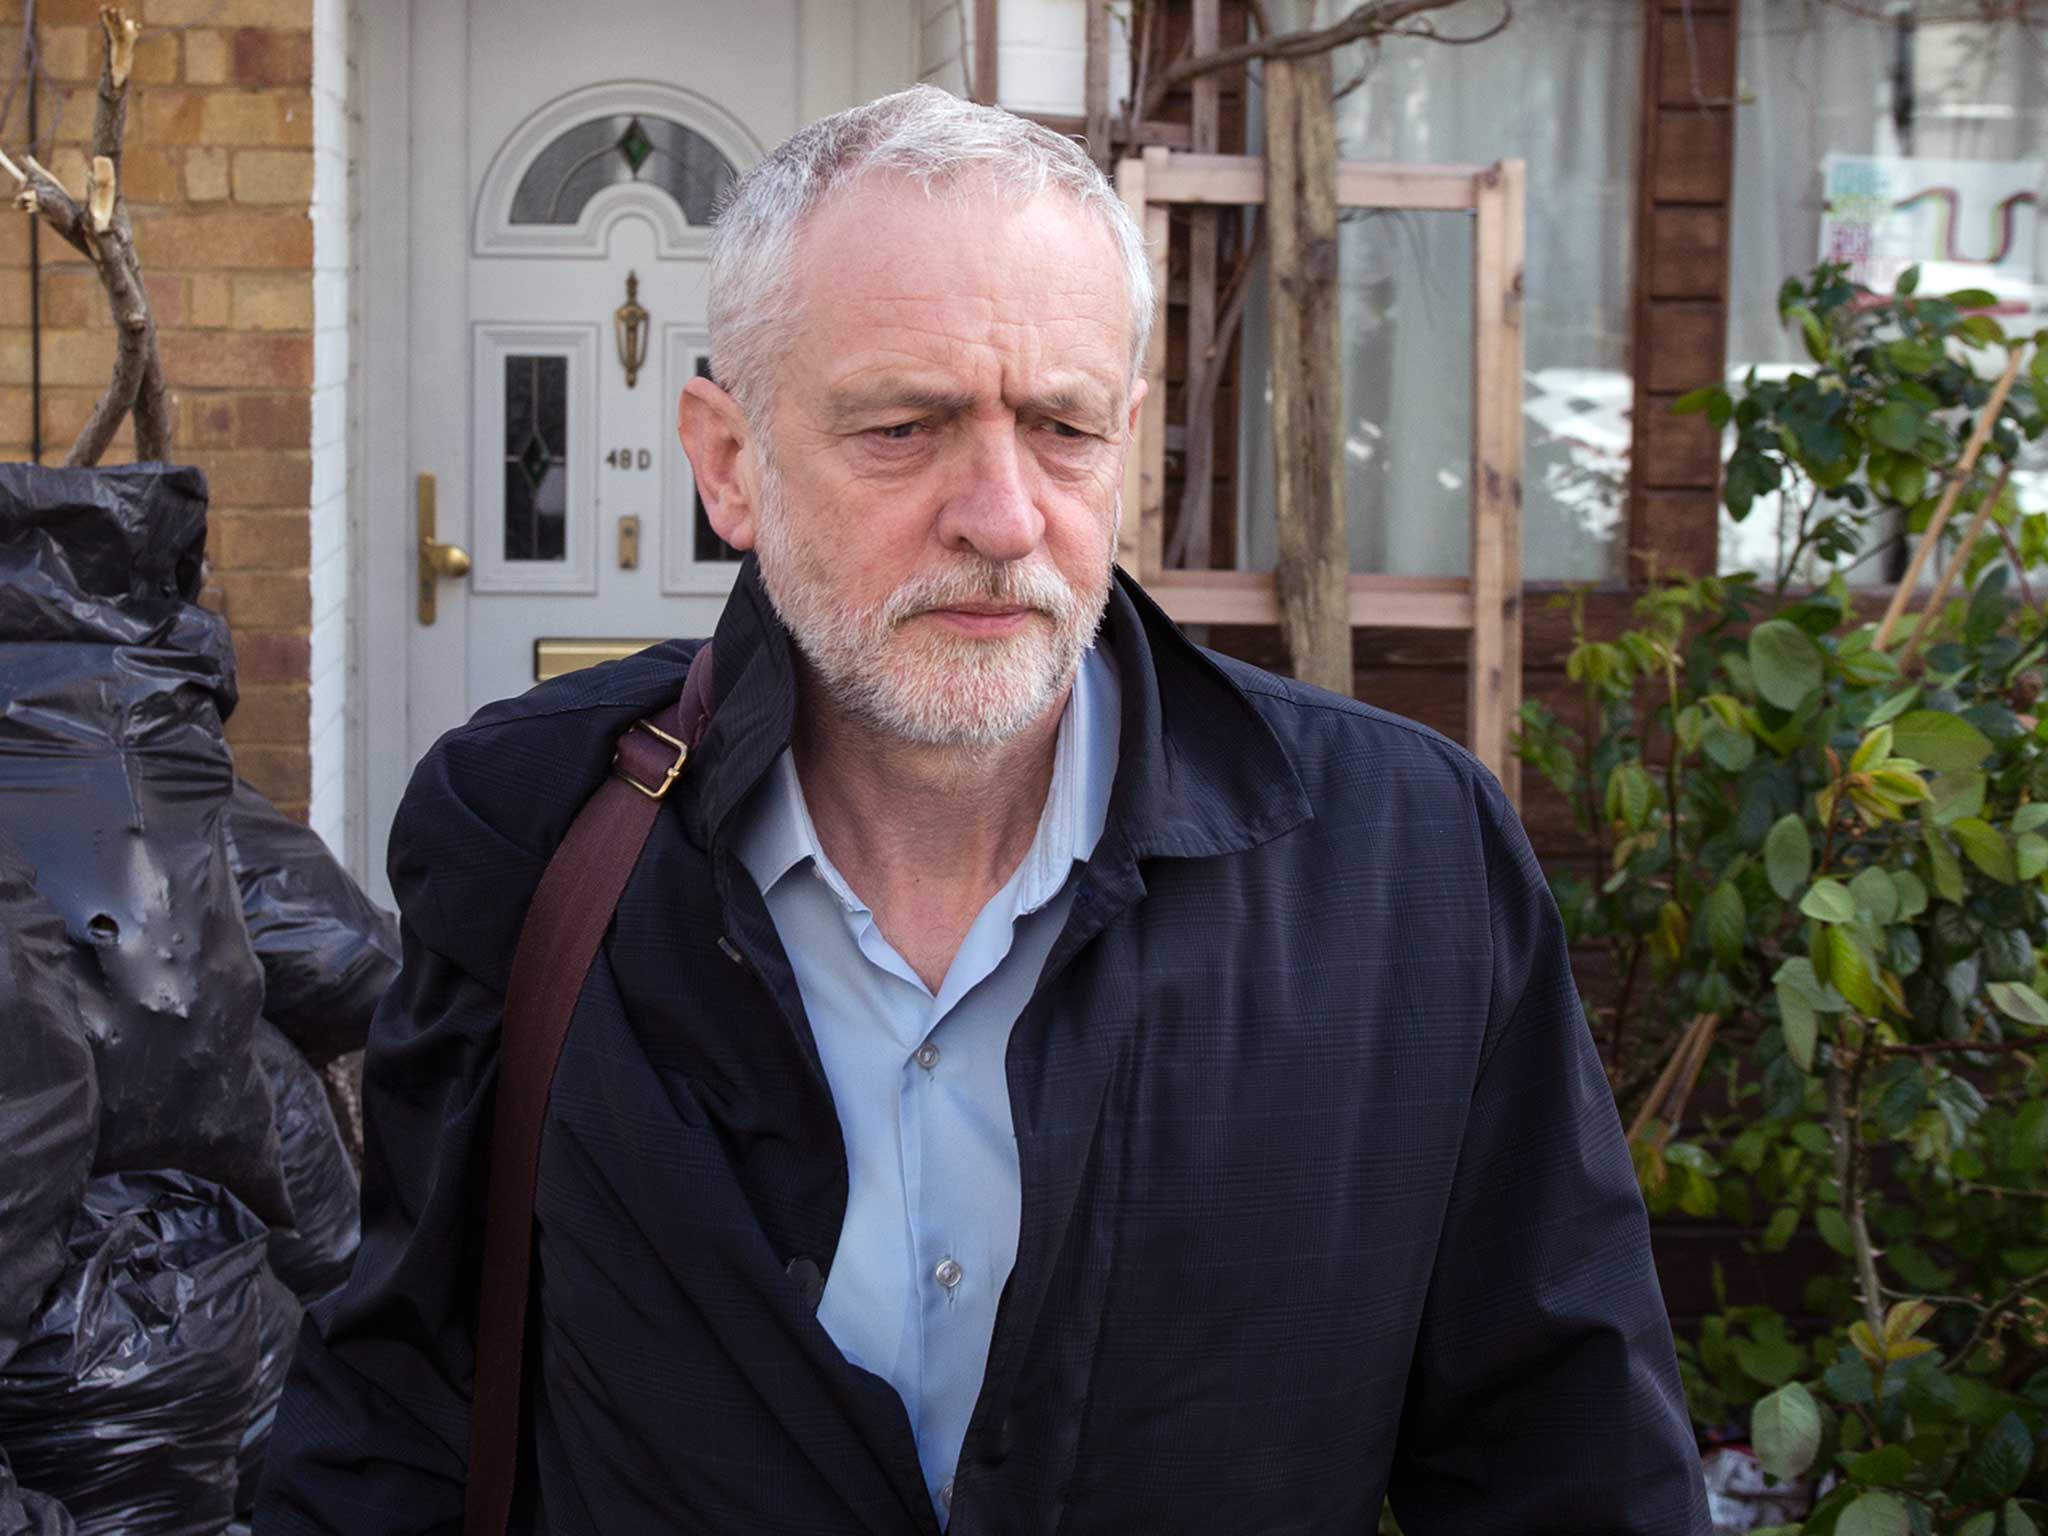 Jeremy Corbyn has launched an independent inquiry into antisemitism in the party